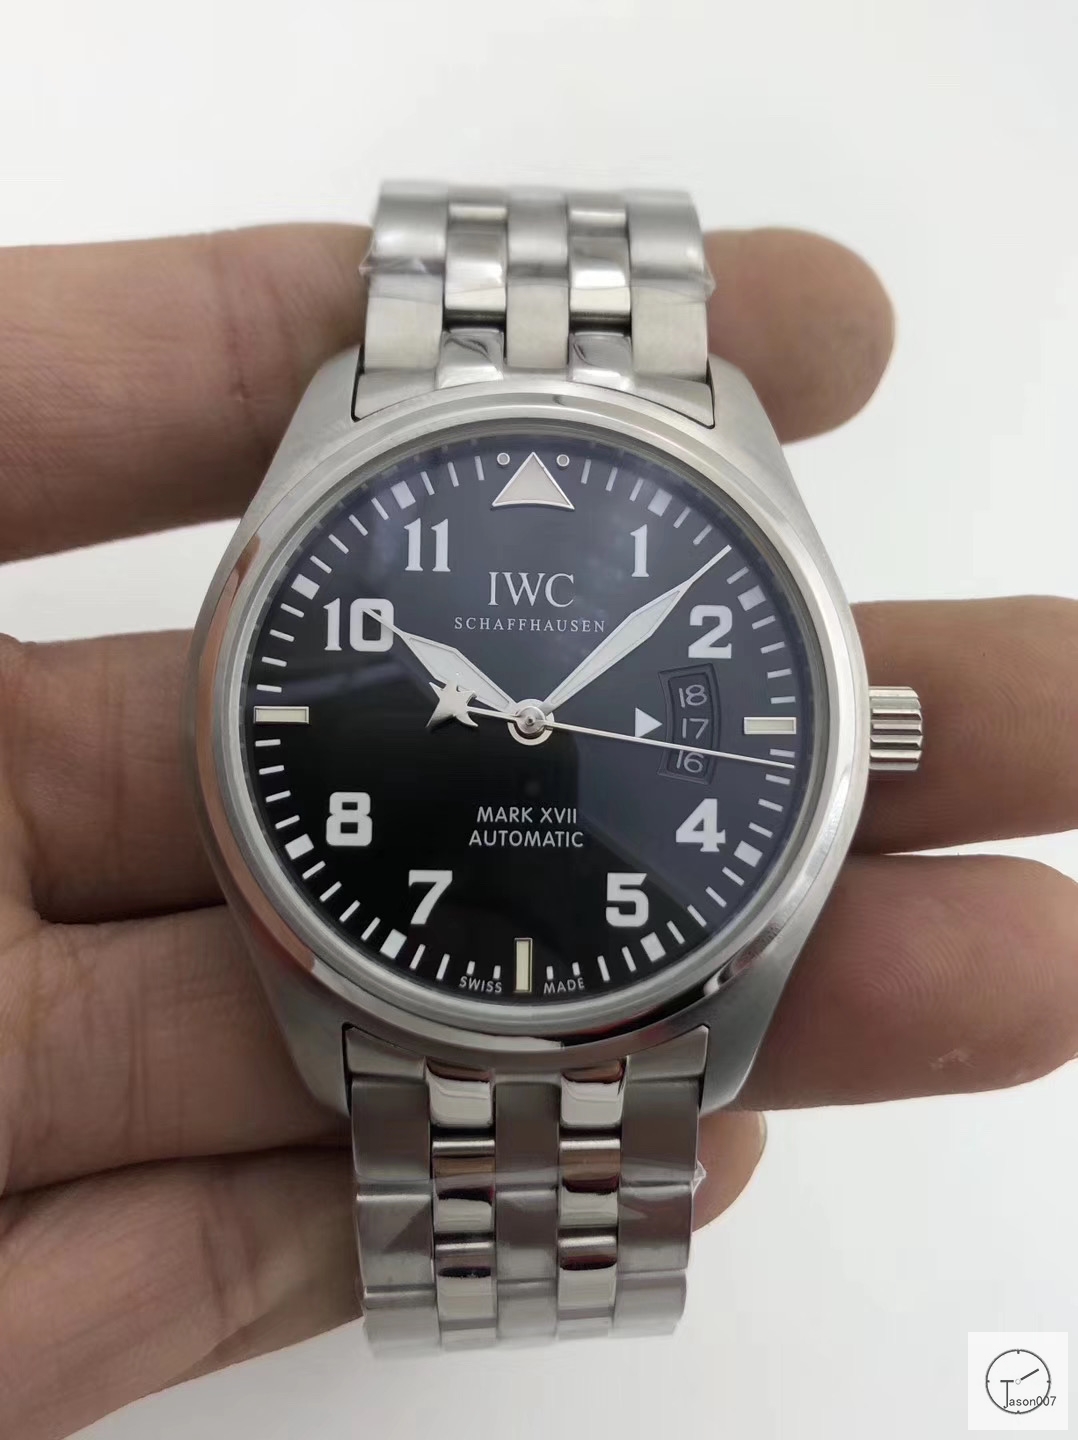 IWC PILOT'S SCHAFFHAUSEN Mark XV2 WATCH AUTOMATIC SPITFIRE AUTOMATIC Mechical IW326803 42MM BLACK DIAL Everose Gold Case Stainless Steel Case Rubber Strap Mens Wristwatches ICW22190560